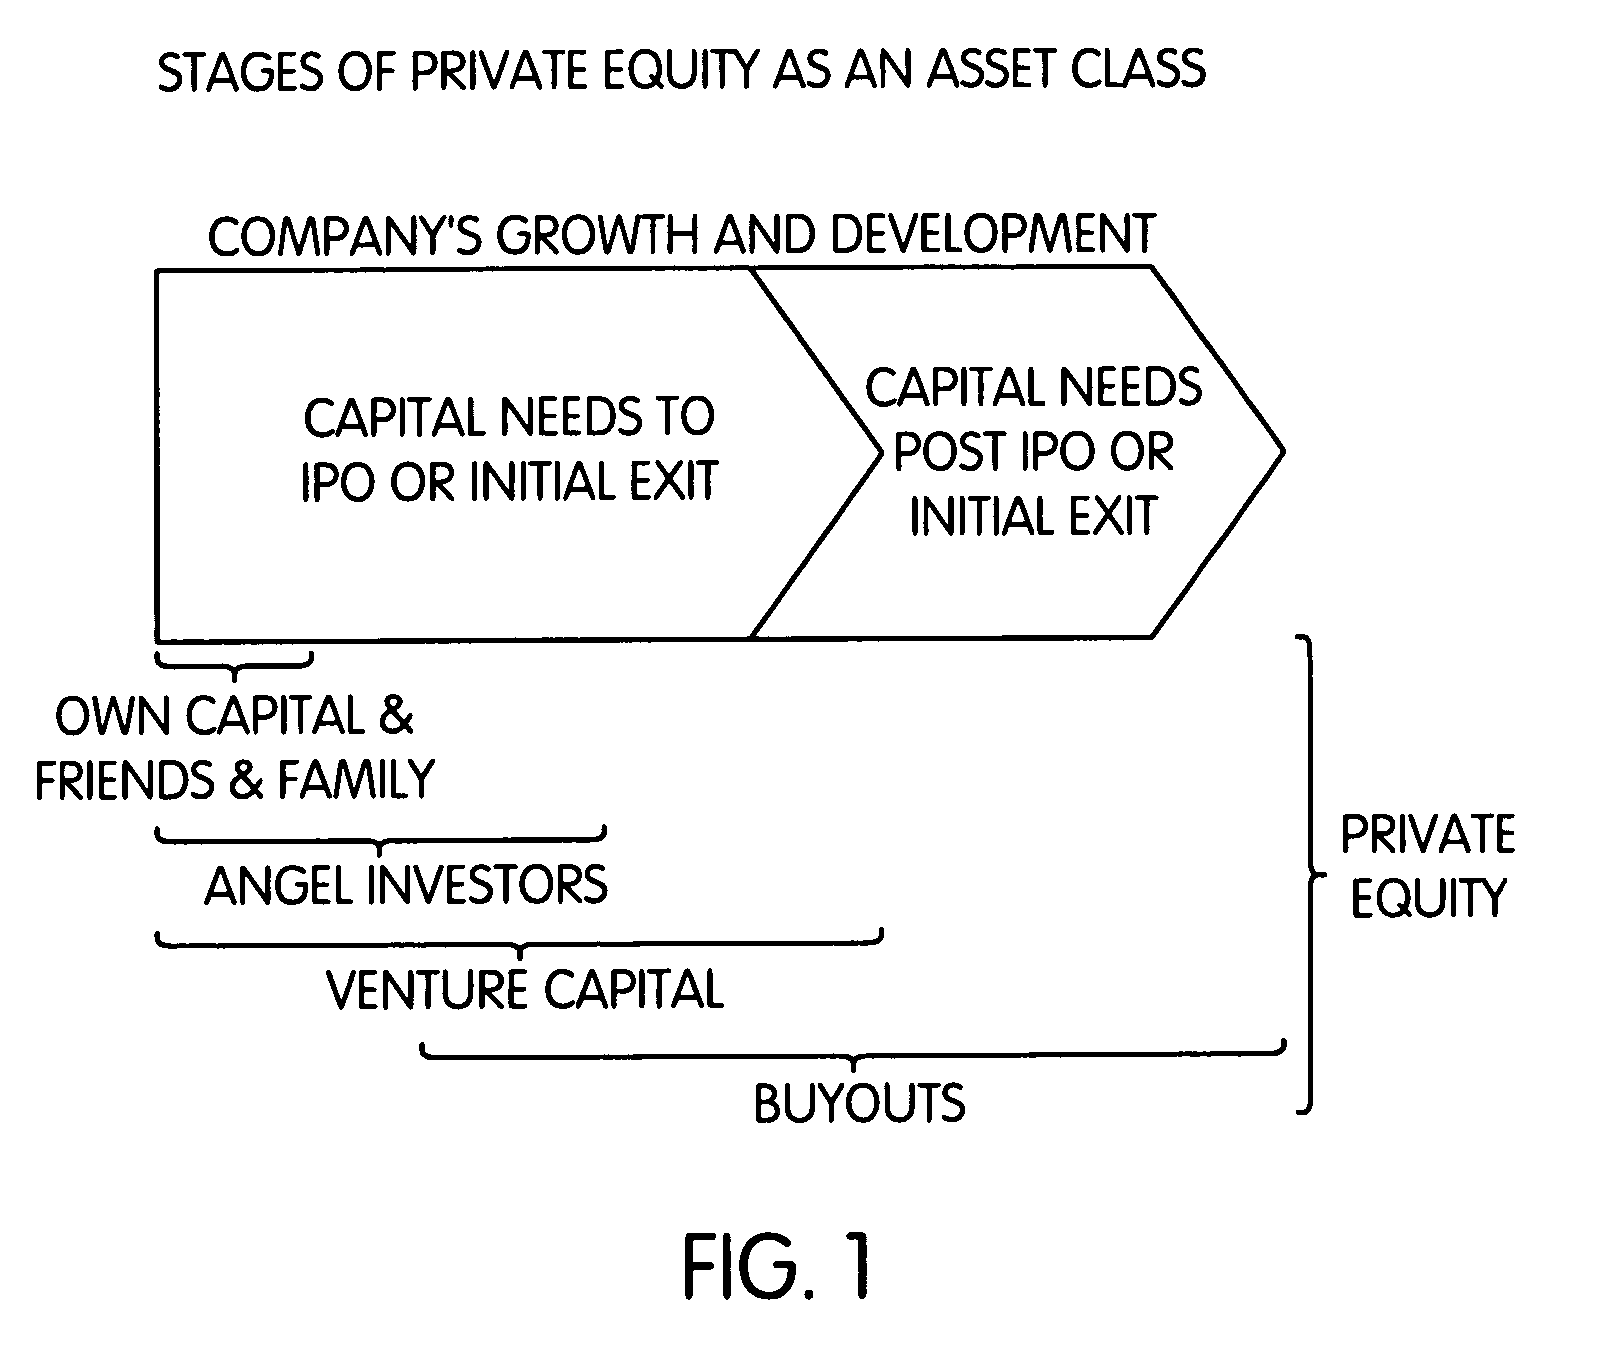 Method for estimating expected cash flow of an investment instrument